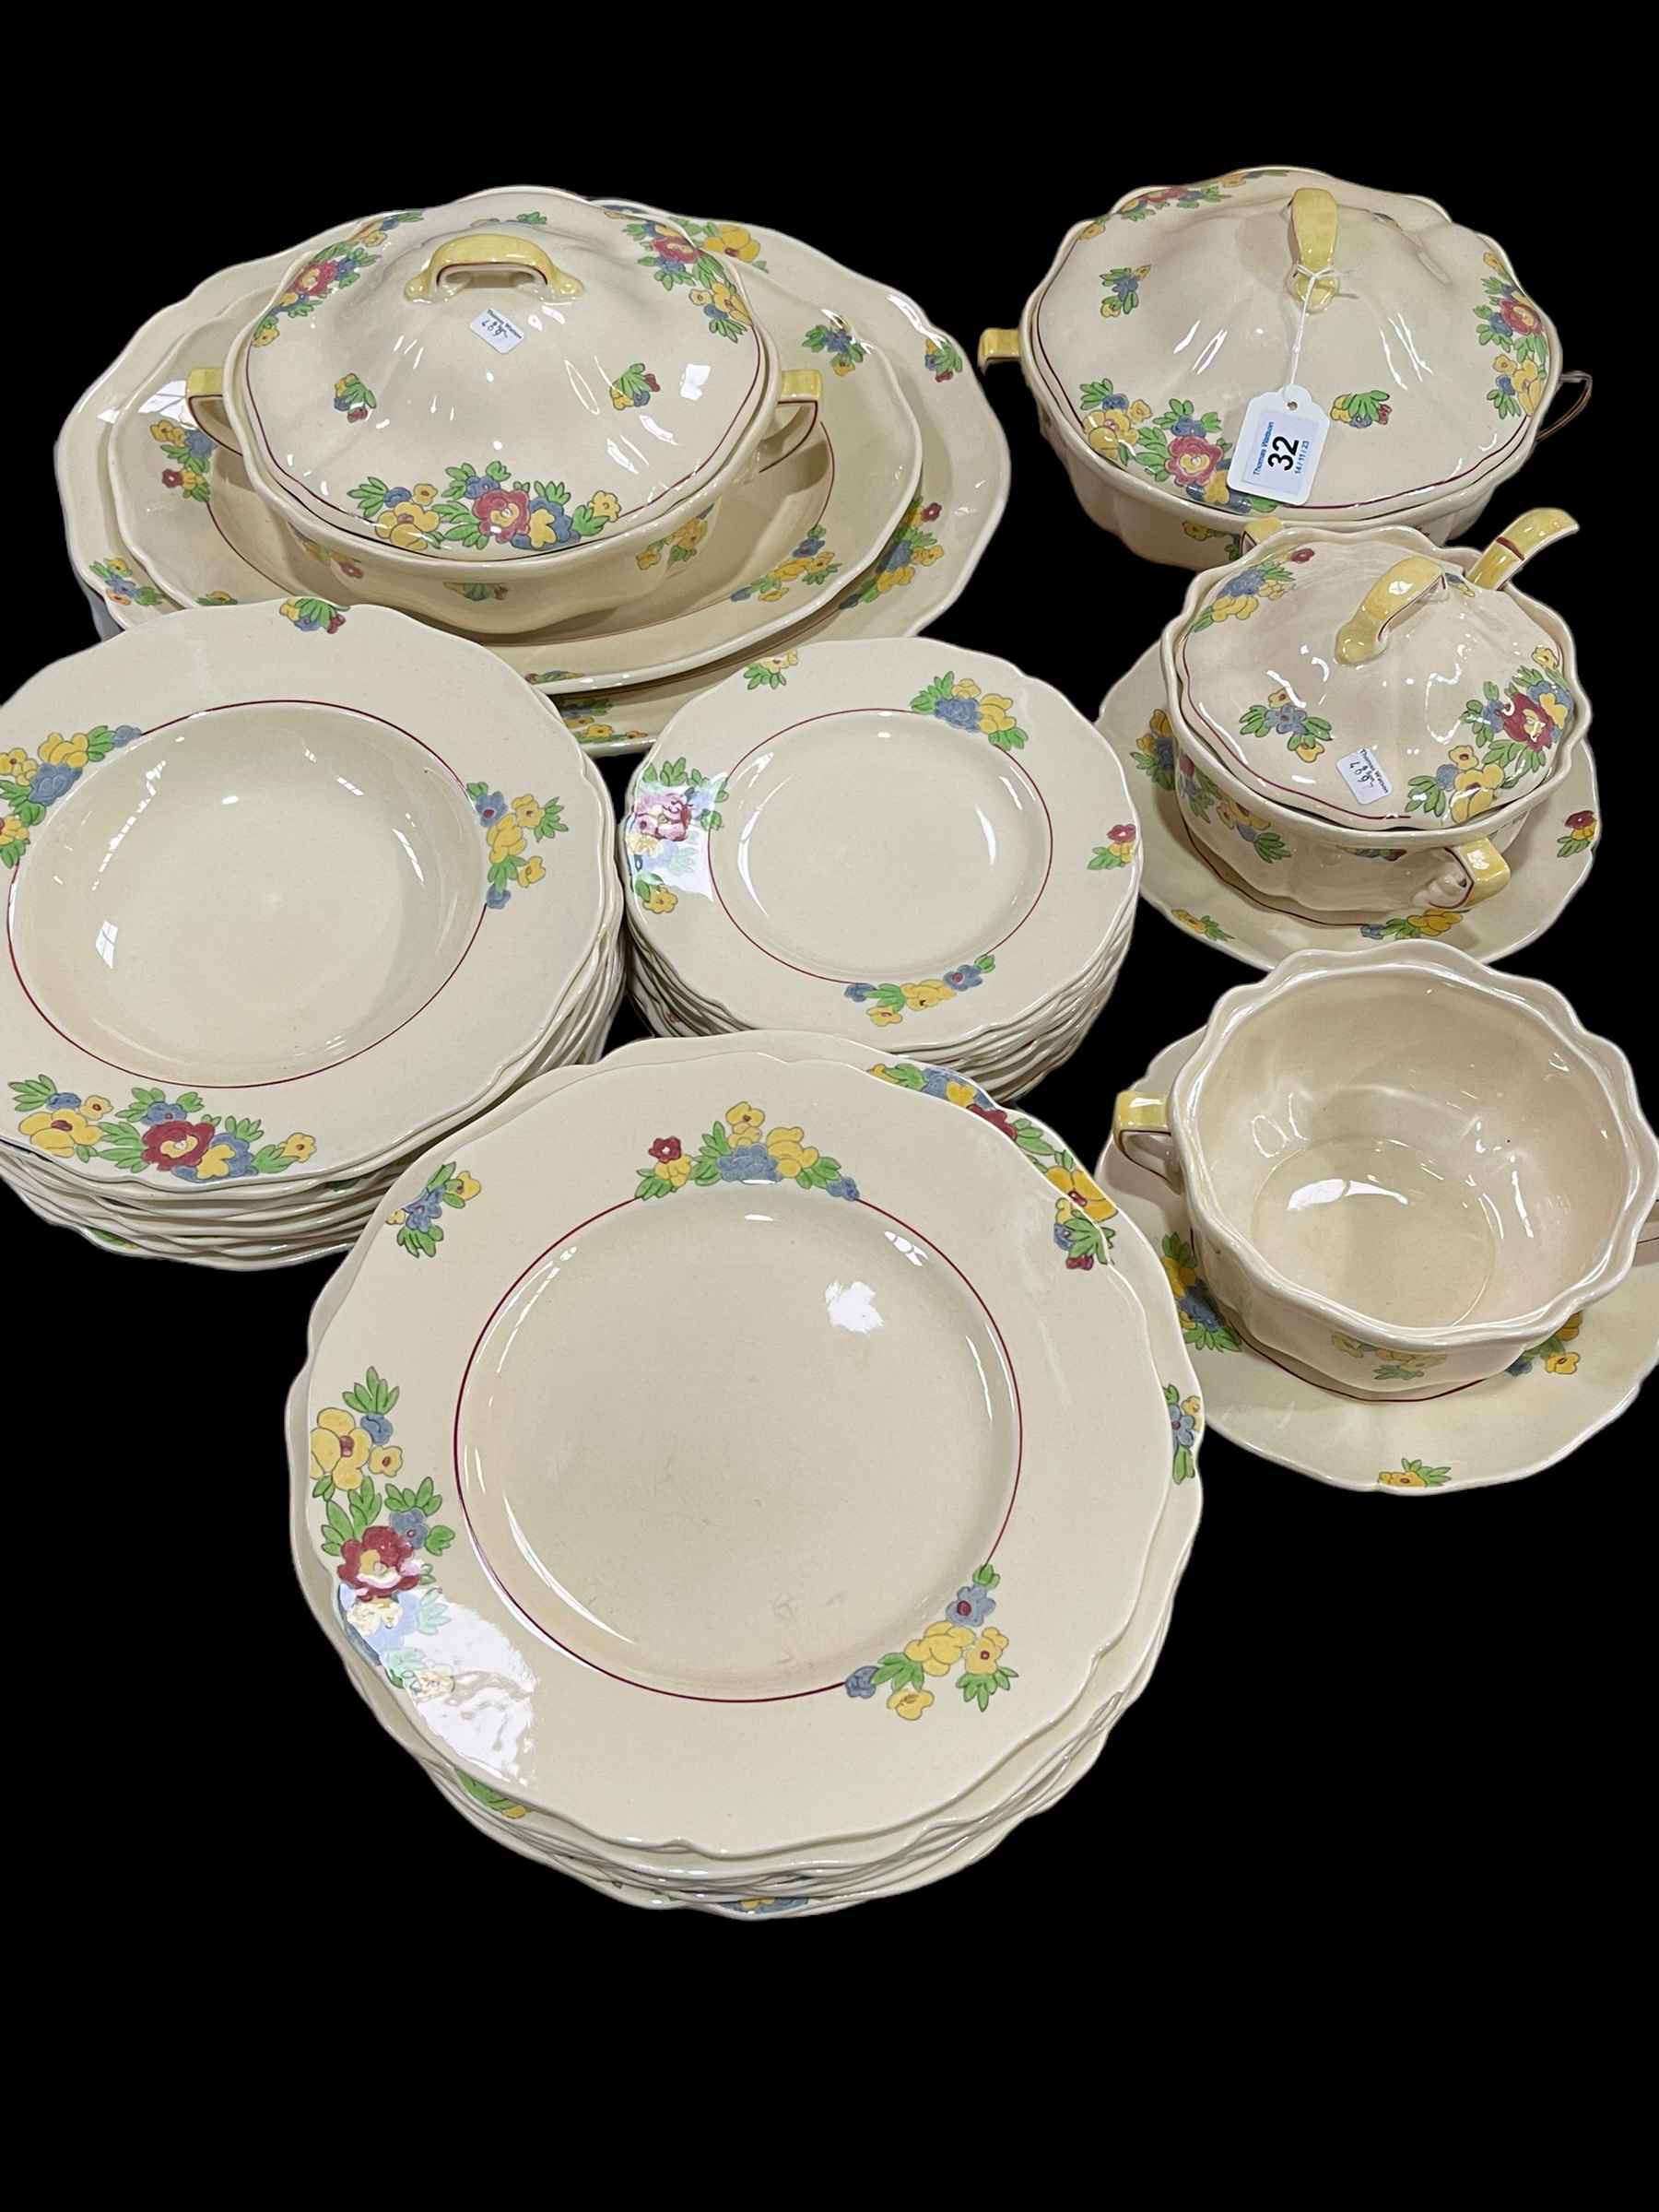 Collection of Royal Doulton Minden dinner service including tureens.